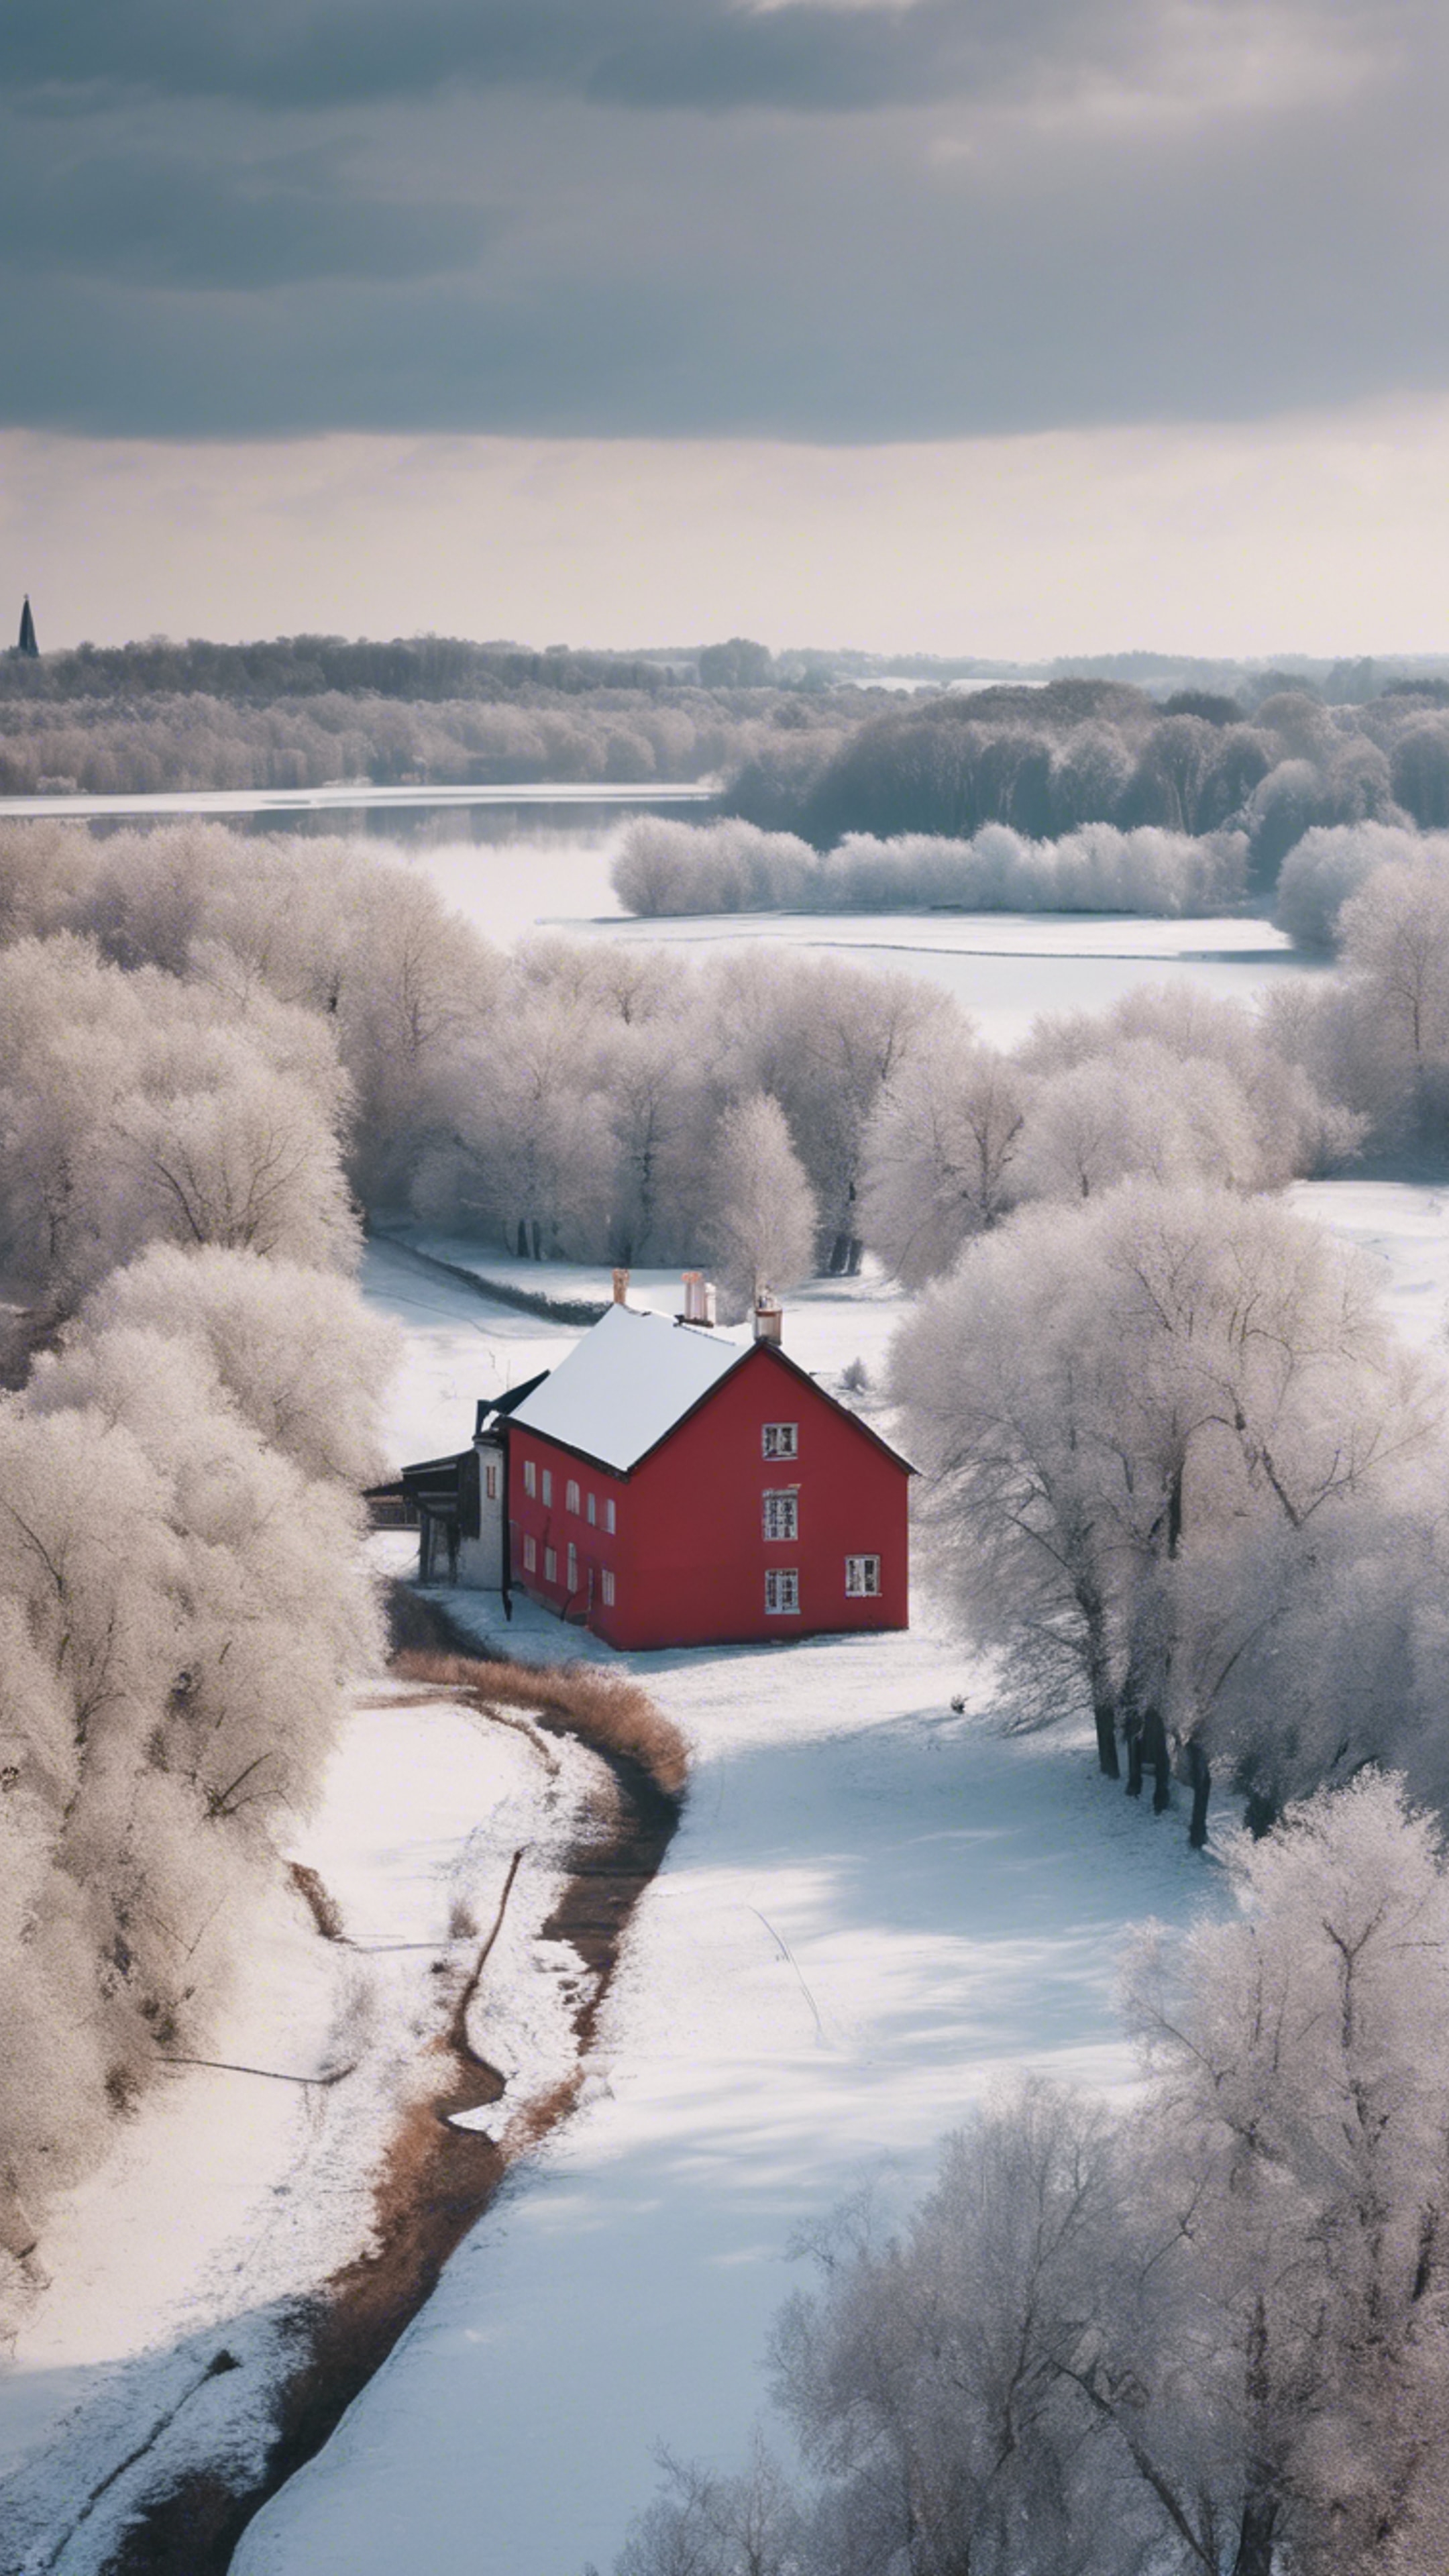 A snow-covered French country landscape with bare trees, a frozen river, and a small red-roofed house in the distance. Валлпапер[86a496d4055745a5962e]